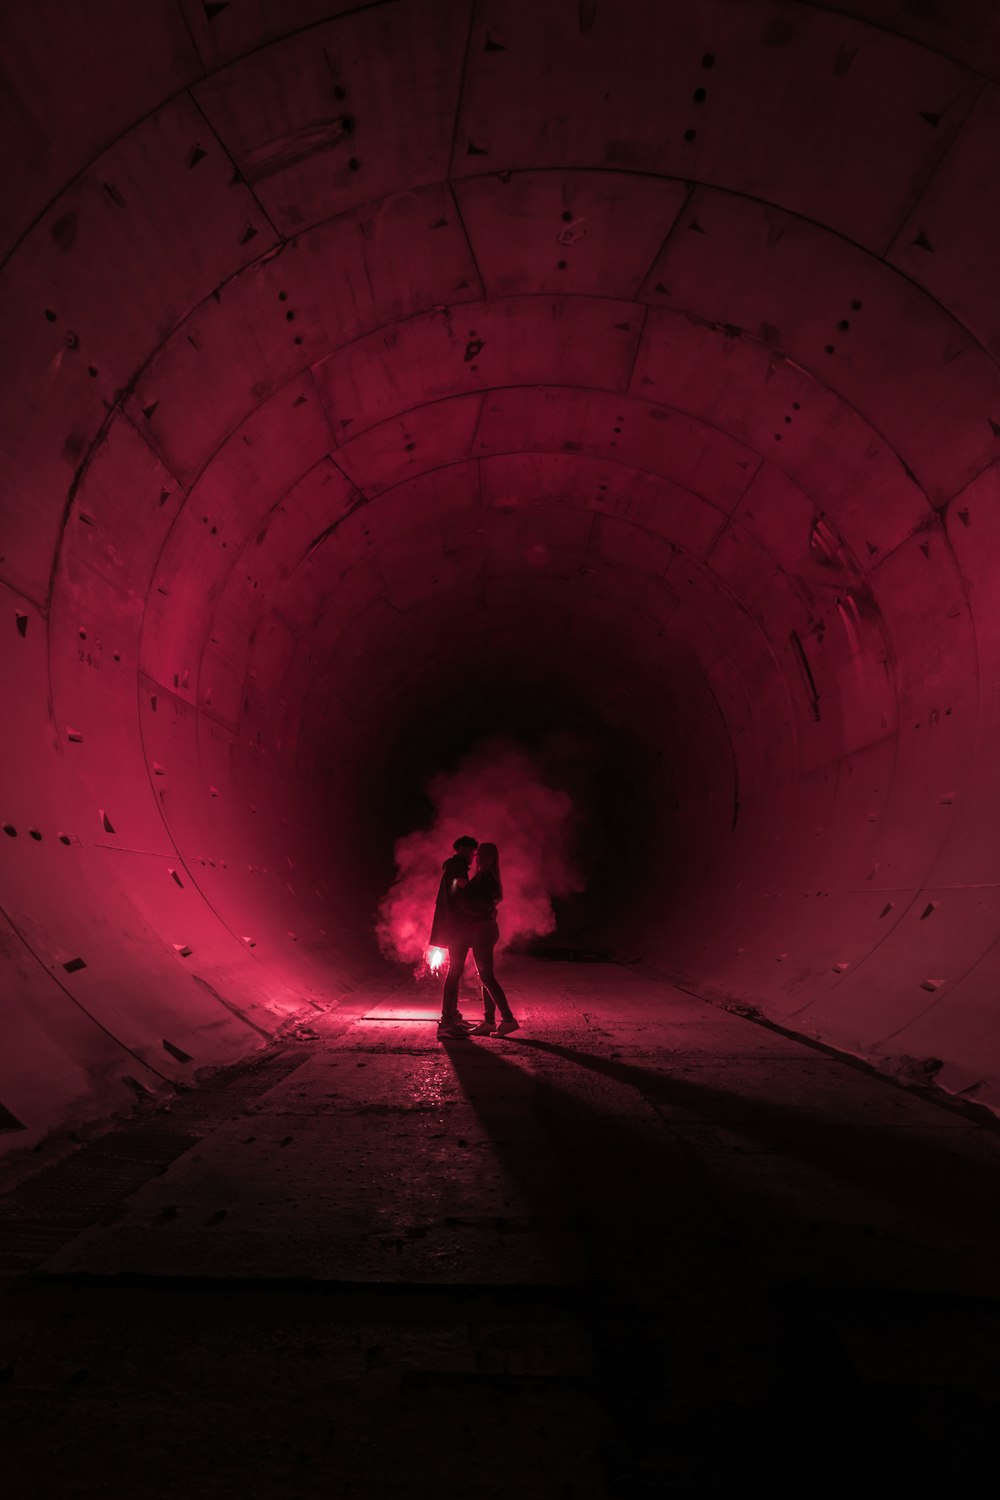 silhouette of person standing on tunnel